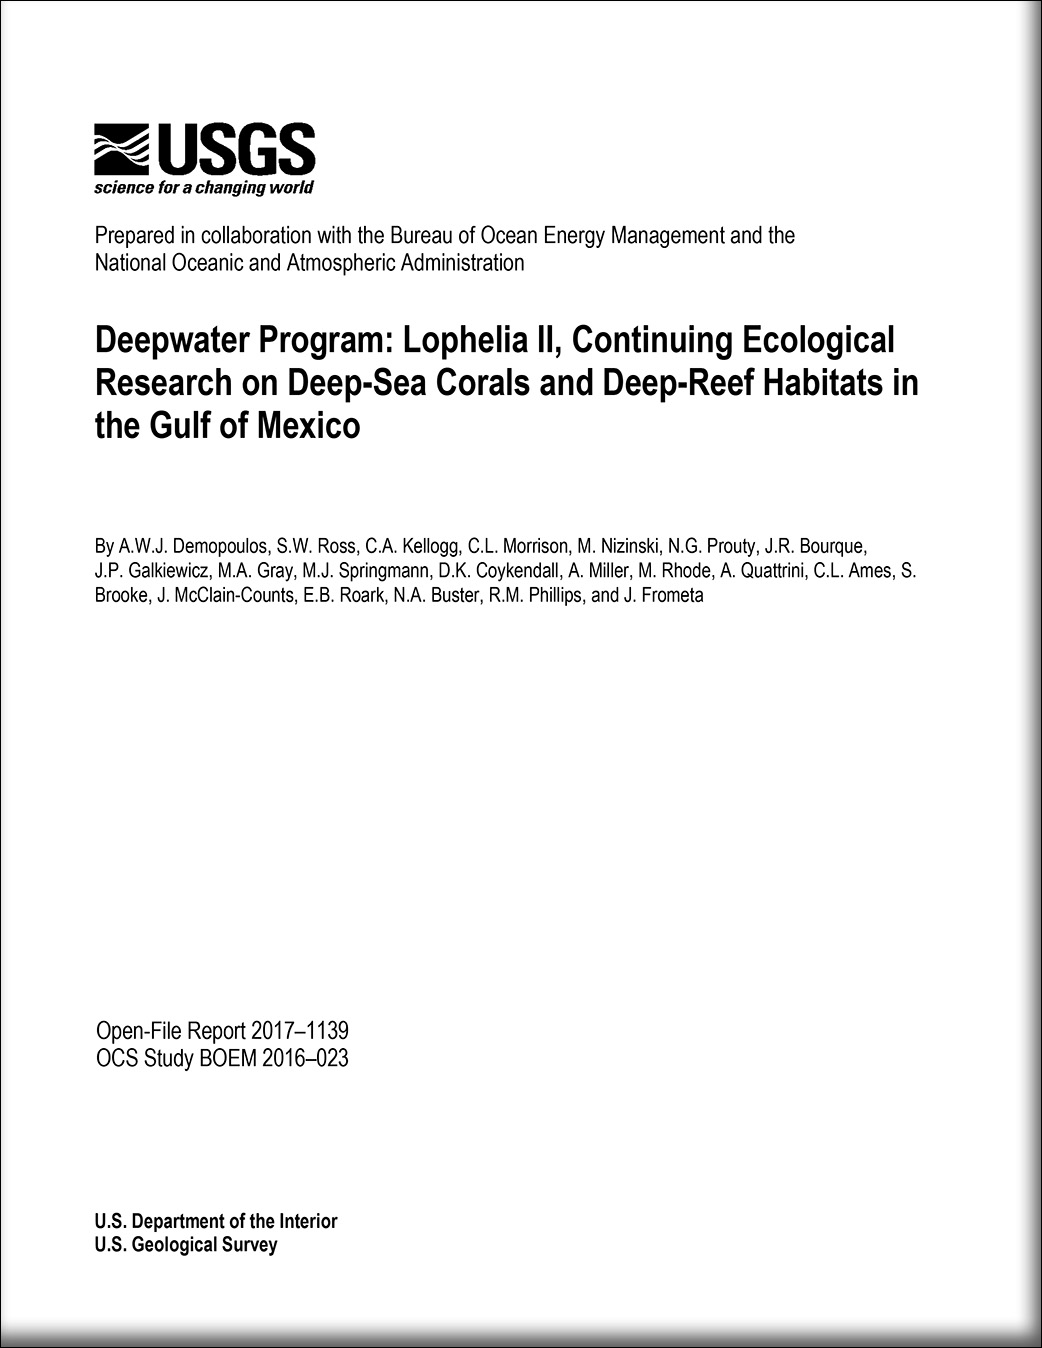 Deepwater Program Lophelia Ii Continuing Ecological Research On Deep Sea Corals And Deep Reef Habitats In The Gulf Of Mexico